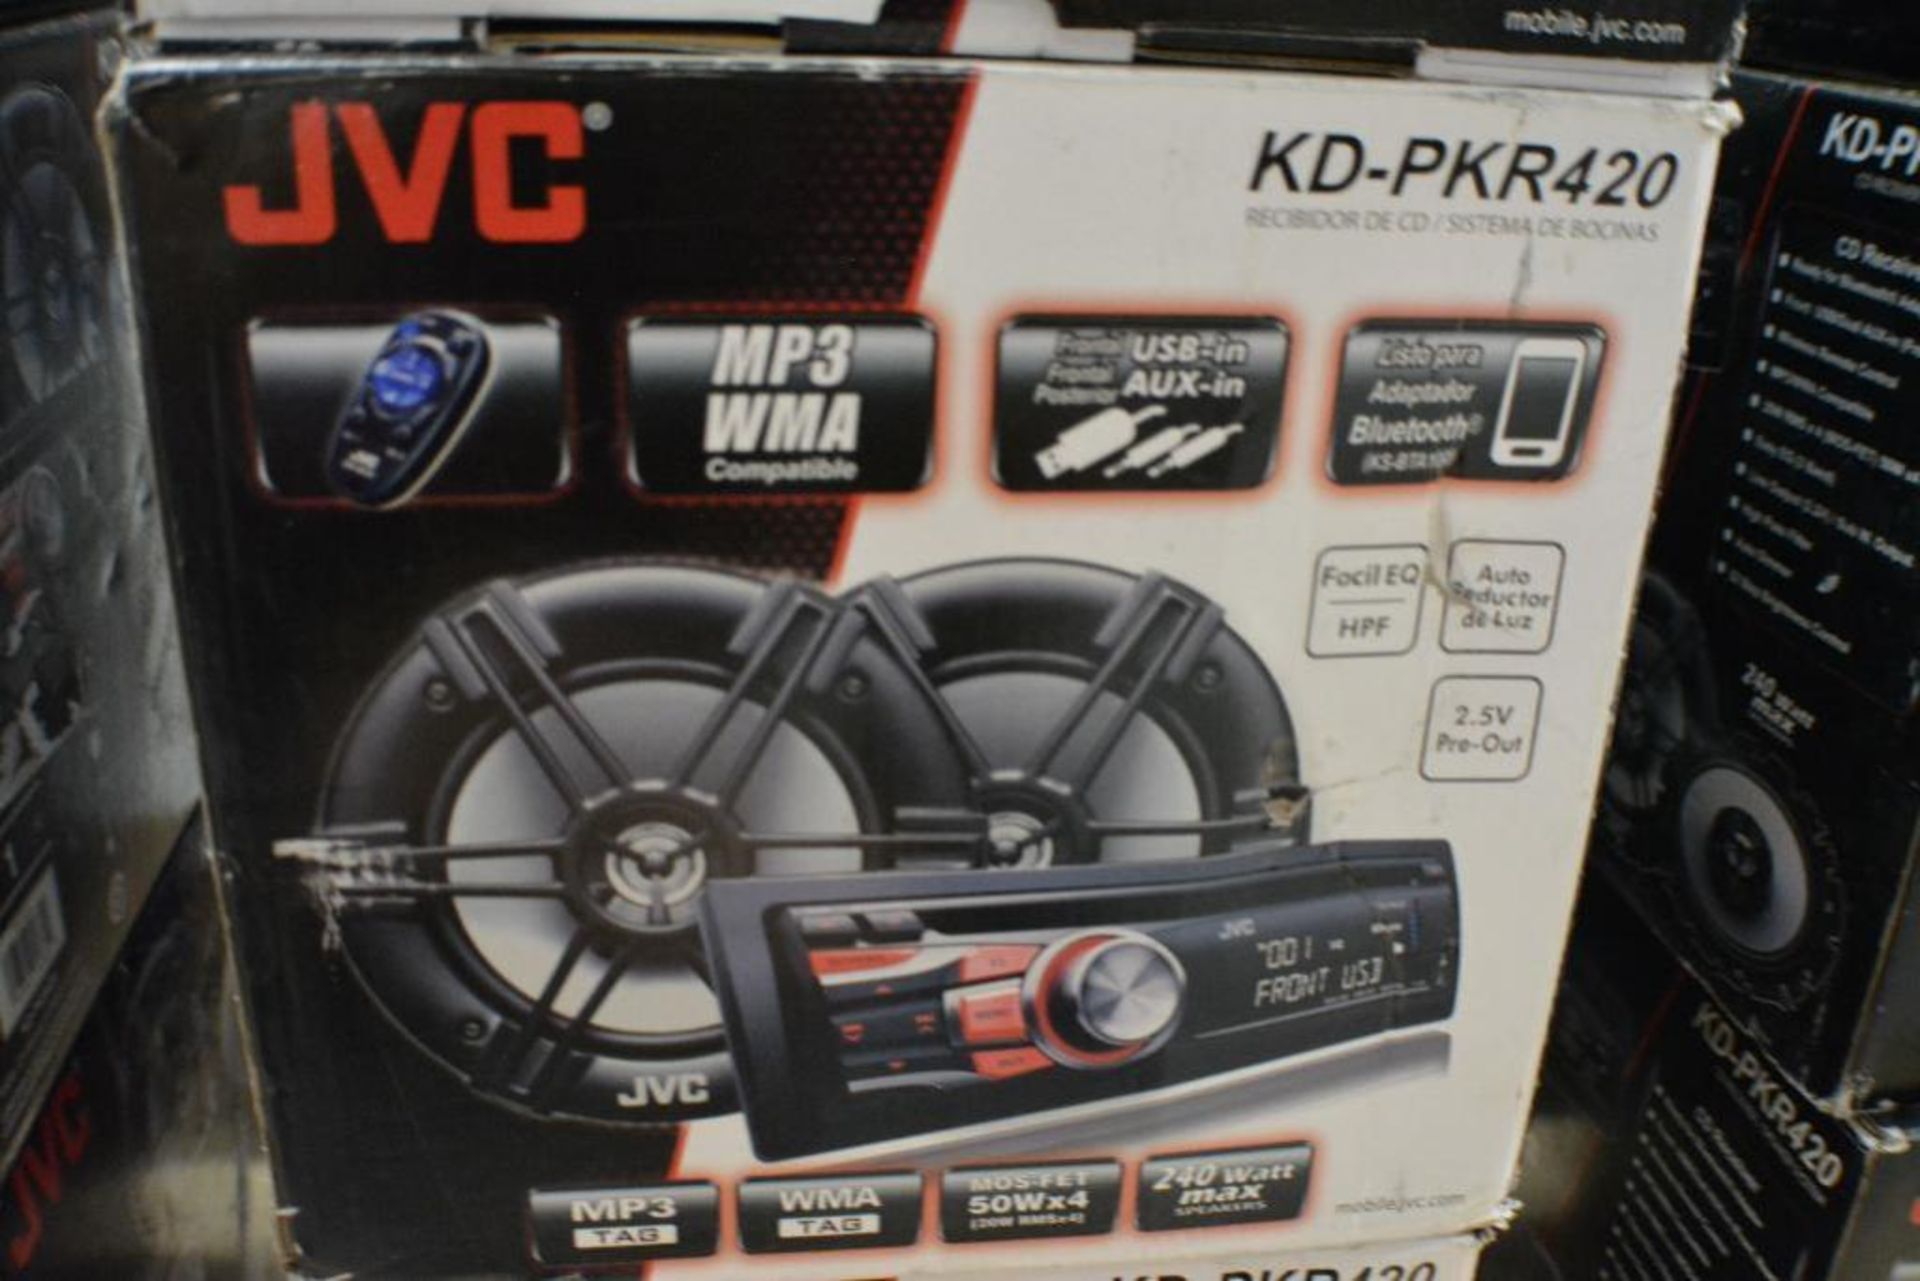 JVC Car Stereo Model KD-PKR420 In-Dash Receiver/Speaker System. MP3 WMA Compatible + Front/Rear USB/ - Image 2 of 2